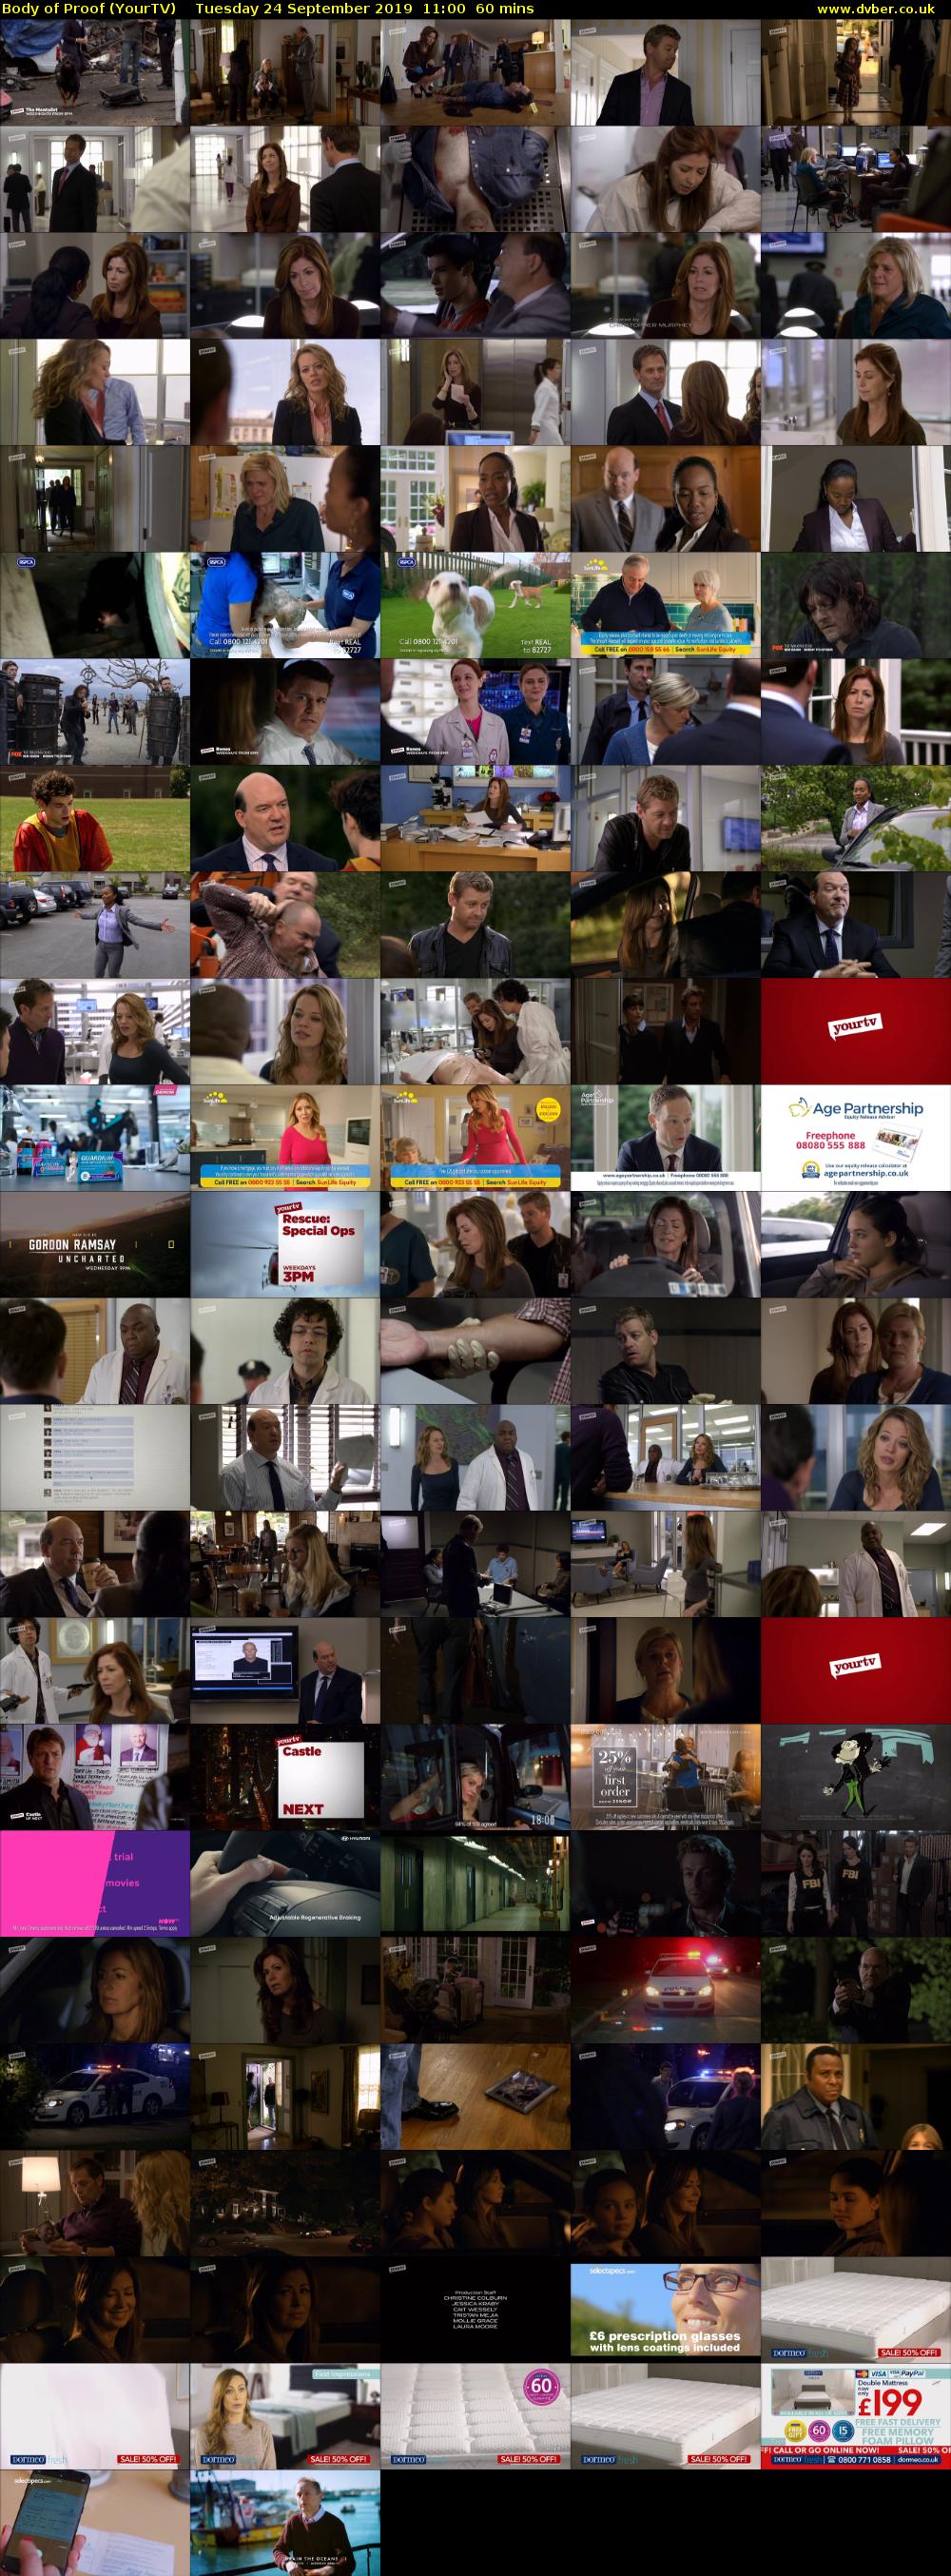 Body of Proof (YourTV) Tuesday 24 September 2019 11:00 - 12:00